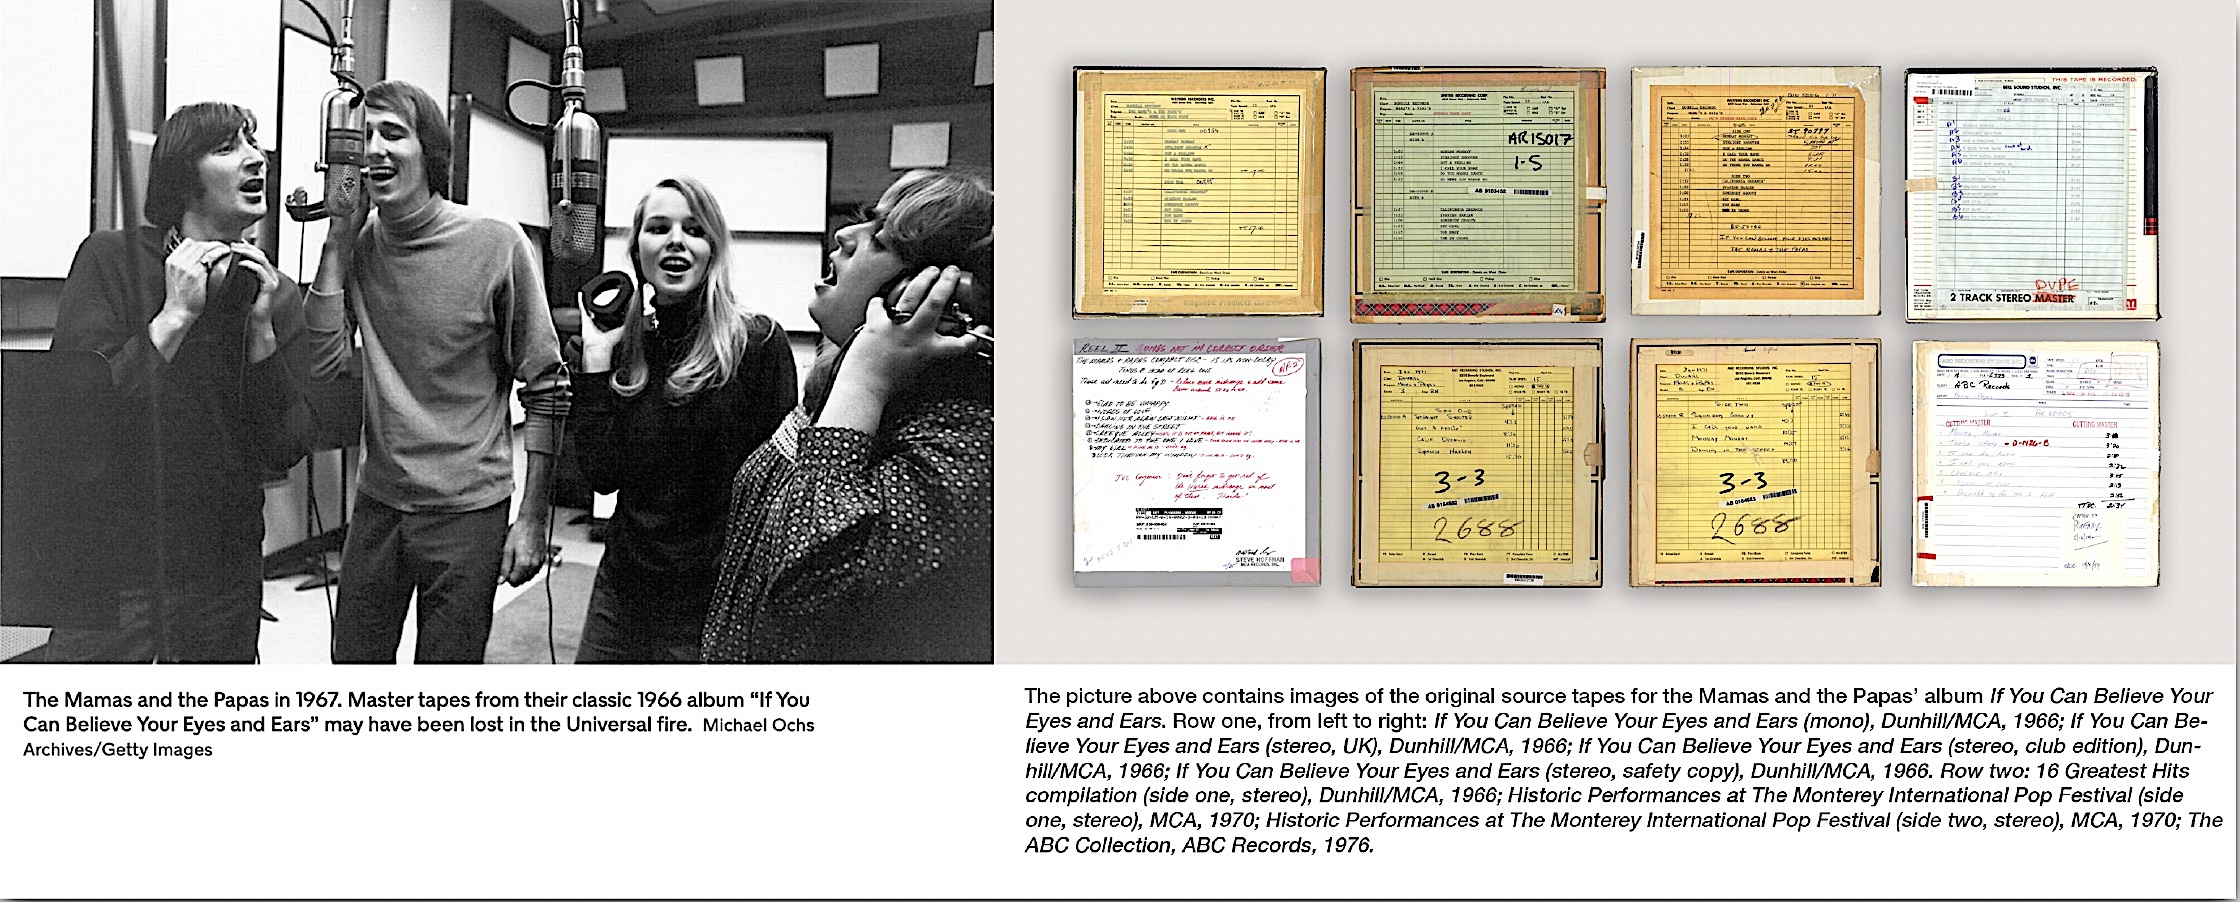 The Mamas and the Papas master tapes